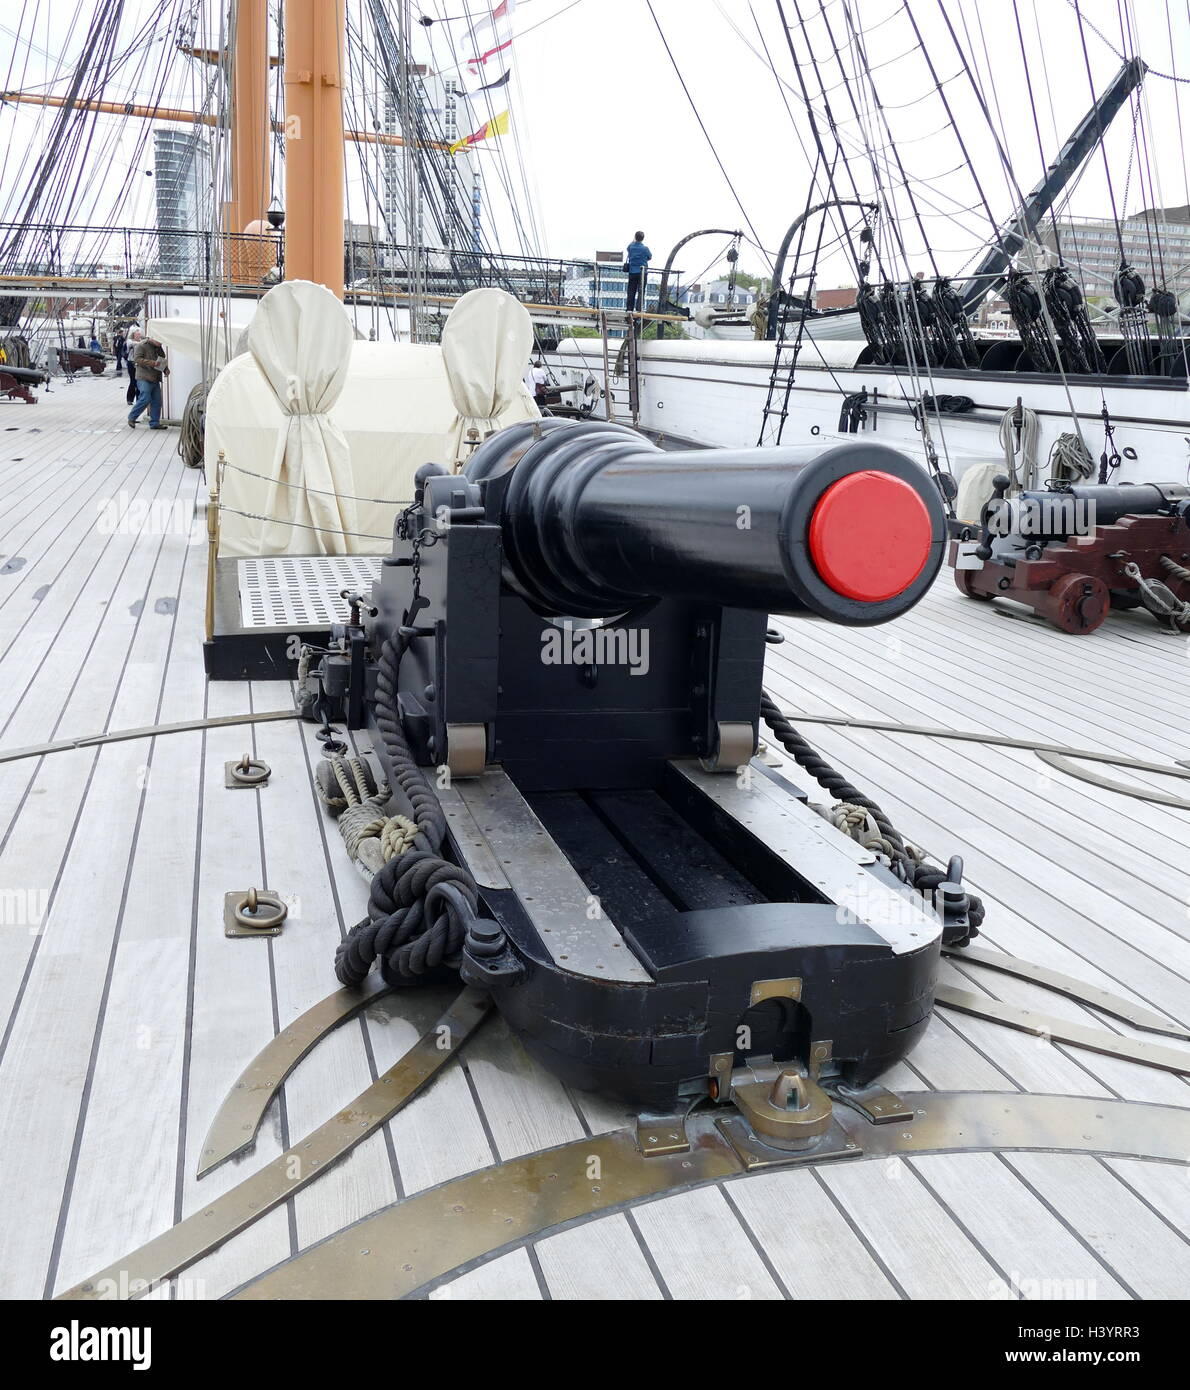 Cannon on the deck of HMS Warrior; the Royal Navy's first ironclad ocean-going armoured battleship, and was launched in 1860. She became a depot ship in 1902, was renamed HMS Vernon III in 1904 Stock Photo